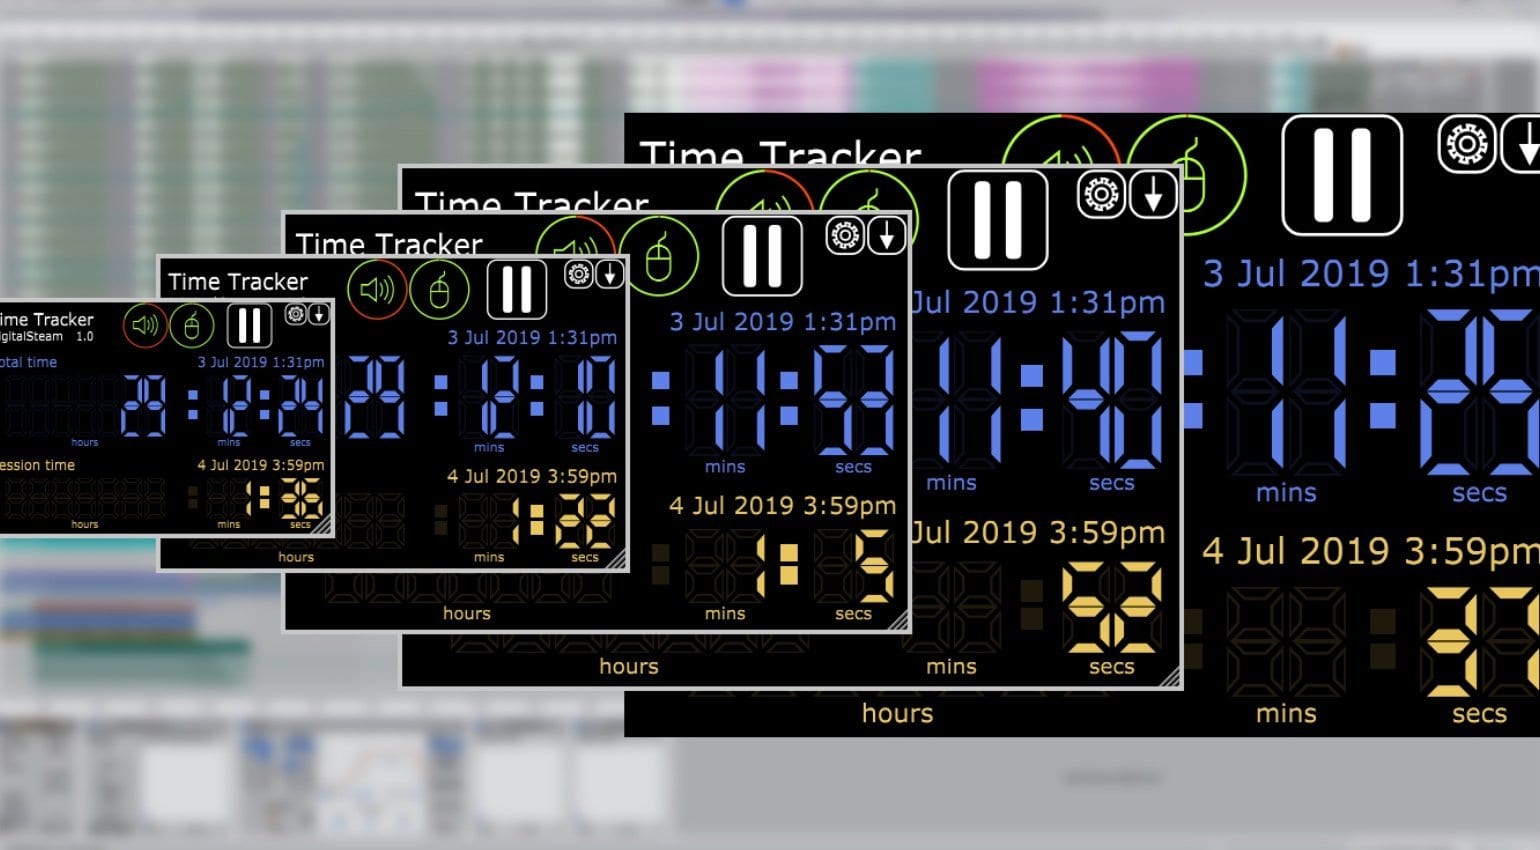 Track of time. Тайм трекер. Gameplay time Tracker.